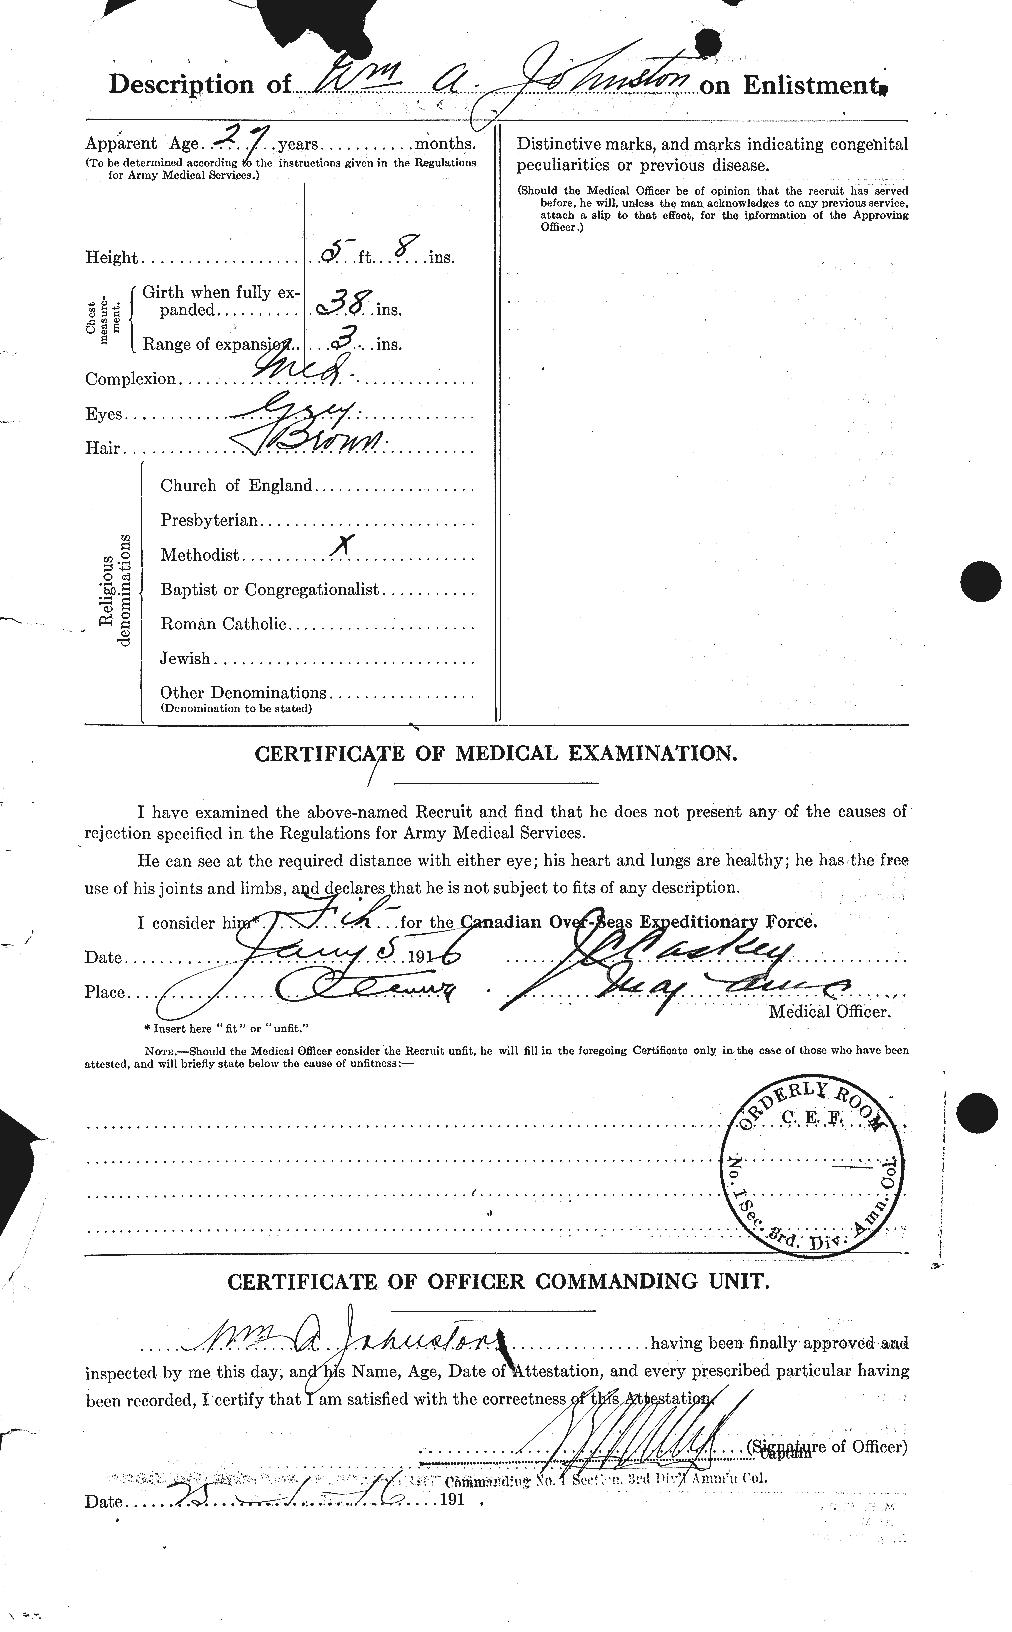 Personnel Records of the First World War - CEF 427300b